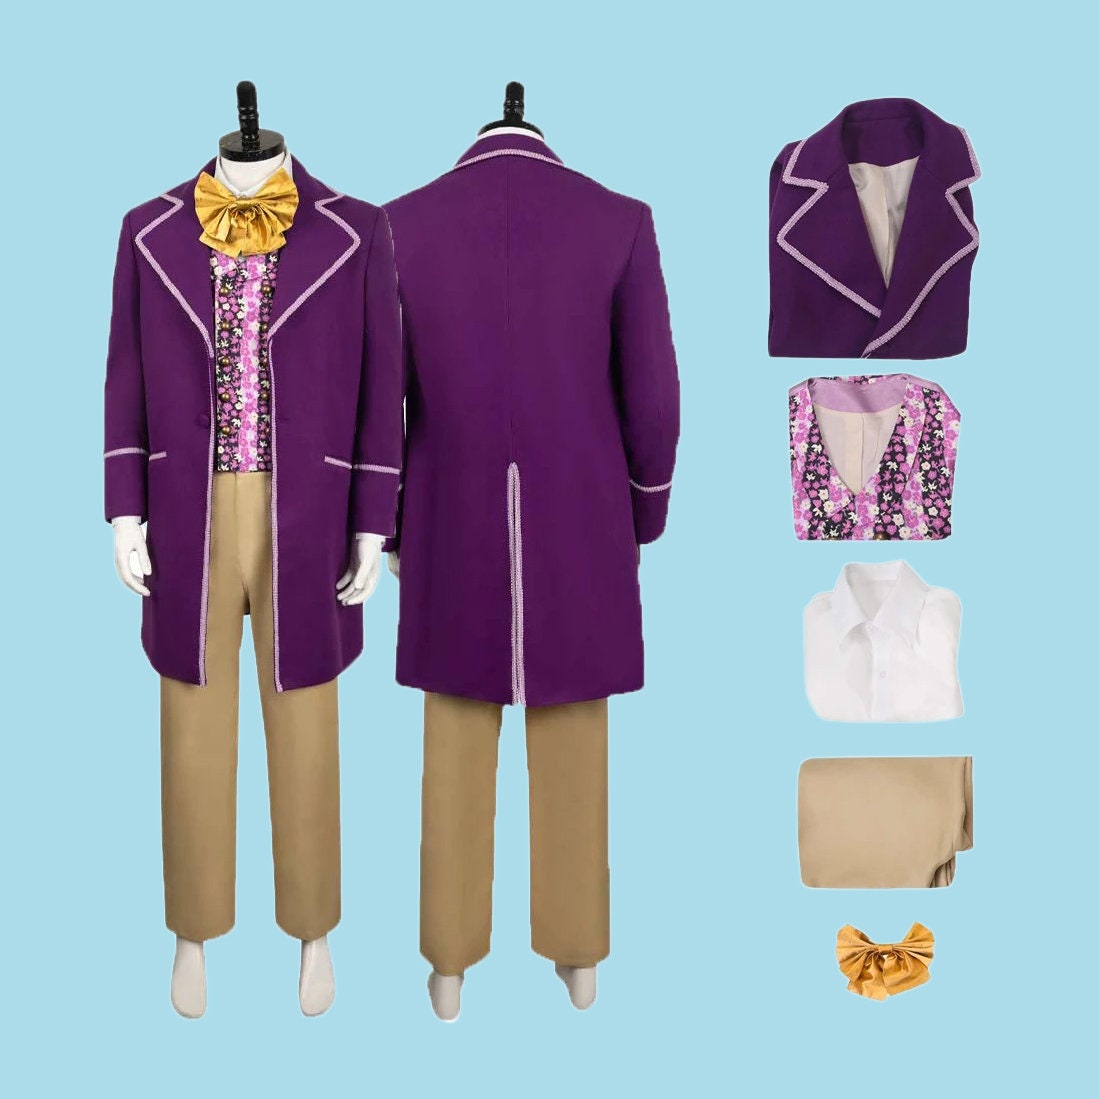 Willy Charlie Cosplay Costume Uniform Chocolate Factory Child Role